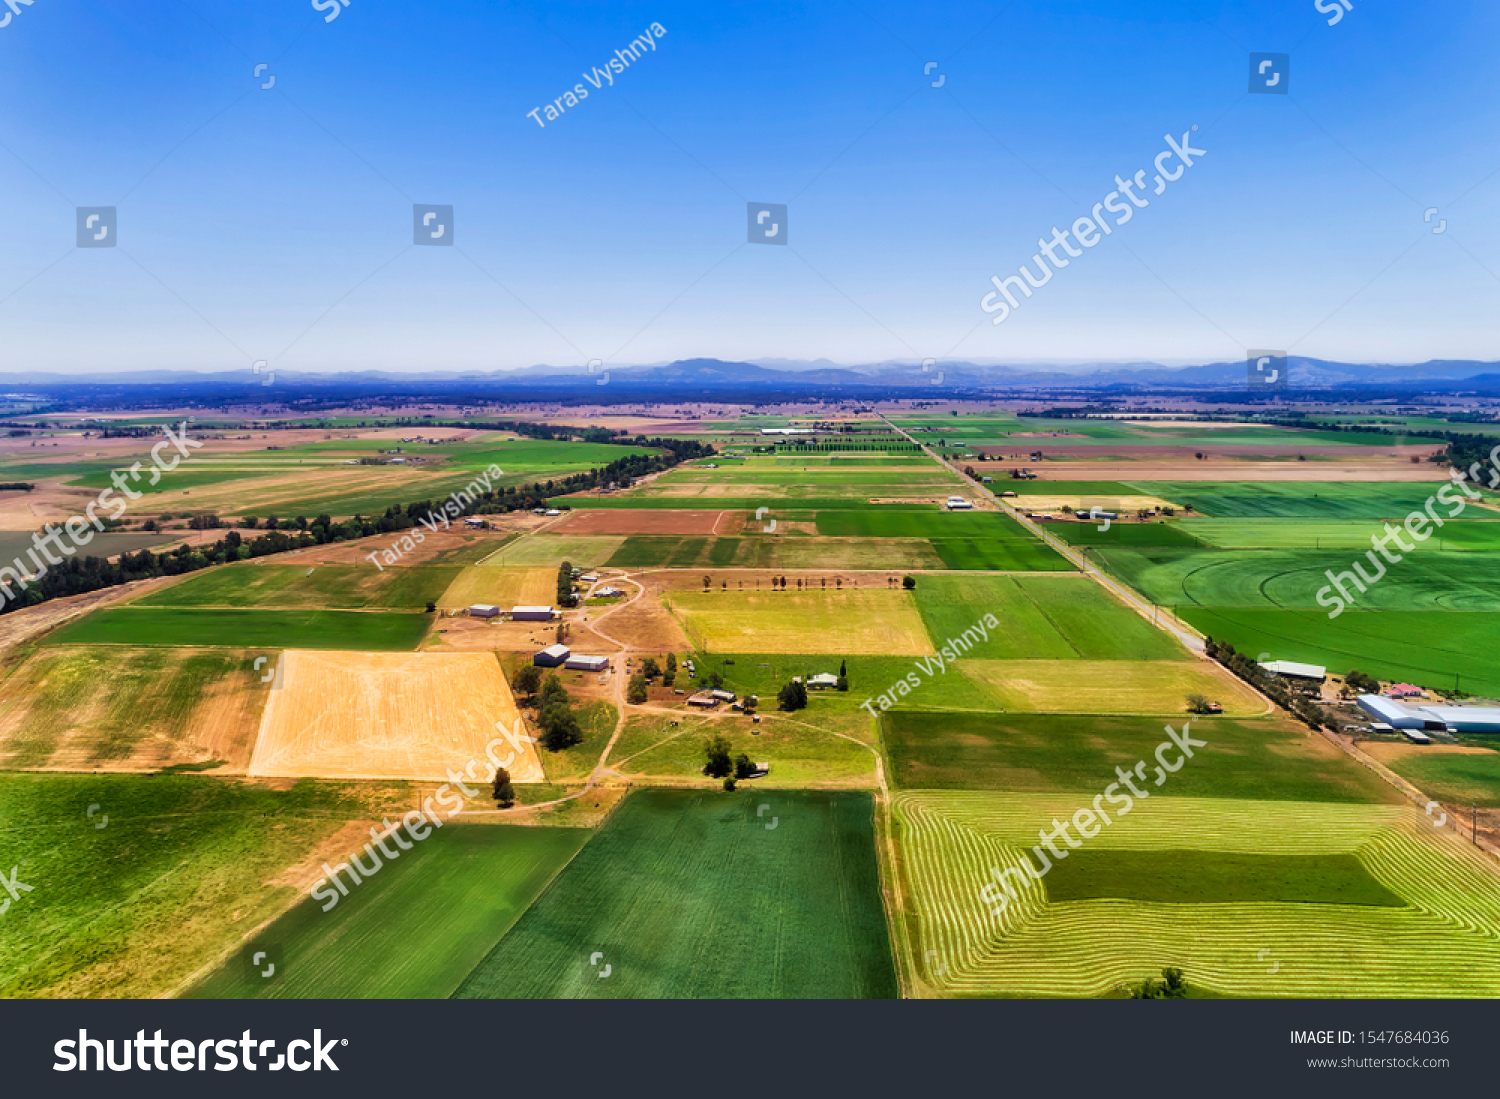 Green farm fields with irrigation and cultivation on shores of Hunter river in Hunter valley region of Australia around farm house under blue sky on a sunny day - aerial view. #1547684036